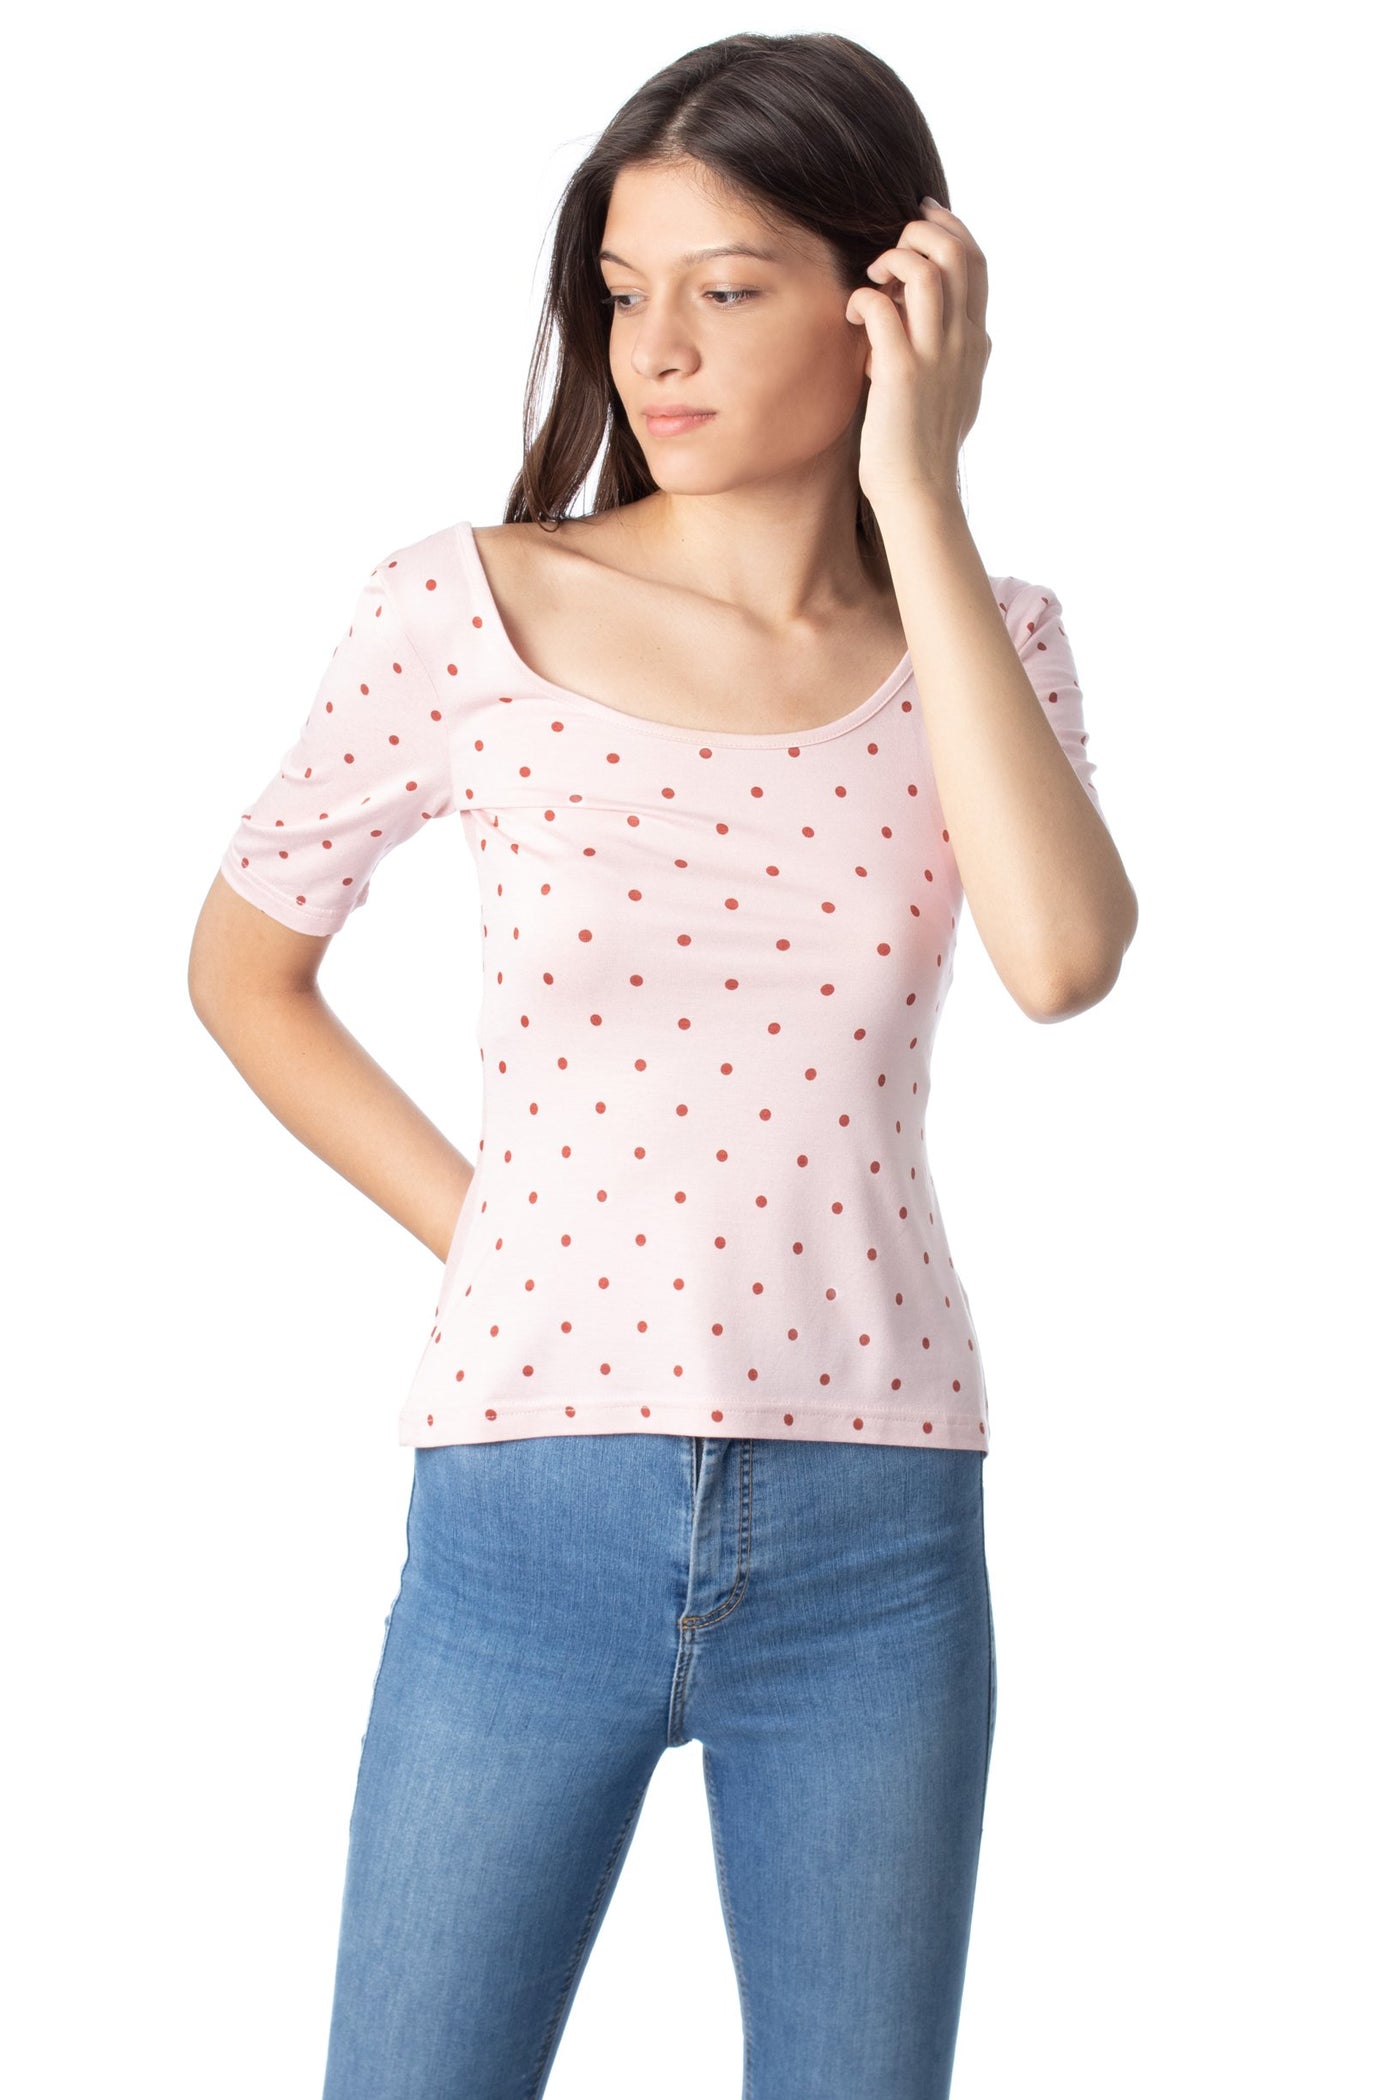 chassca scoop neck t-shirt with red spots - Breakmood